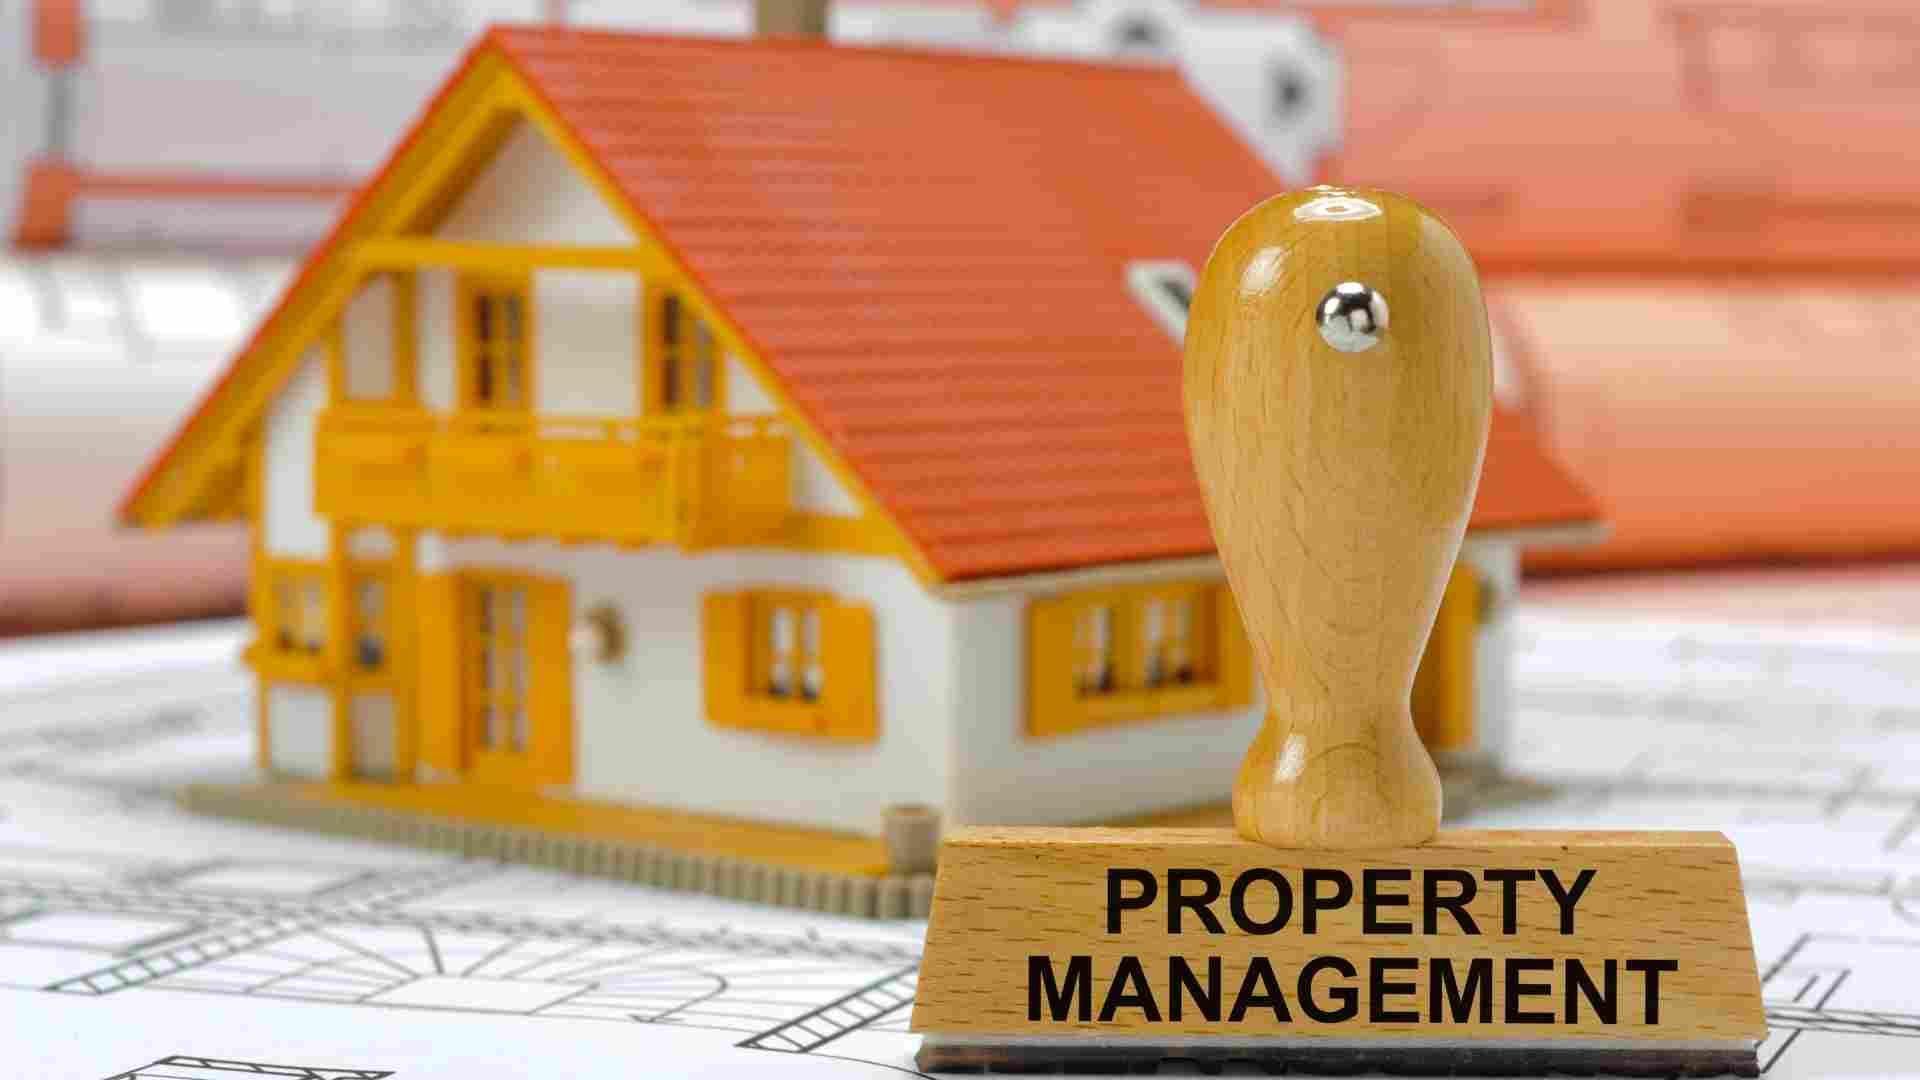 Redsail-Property-Management-property-management-services